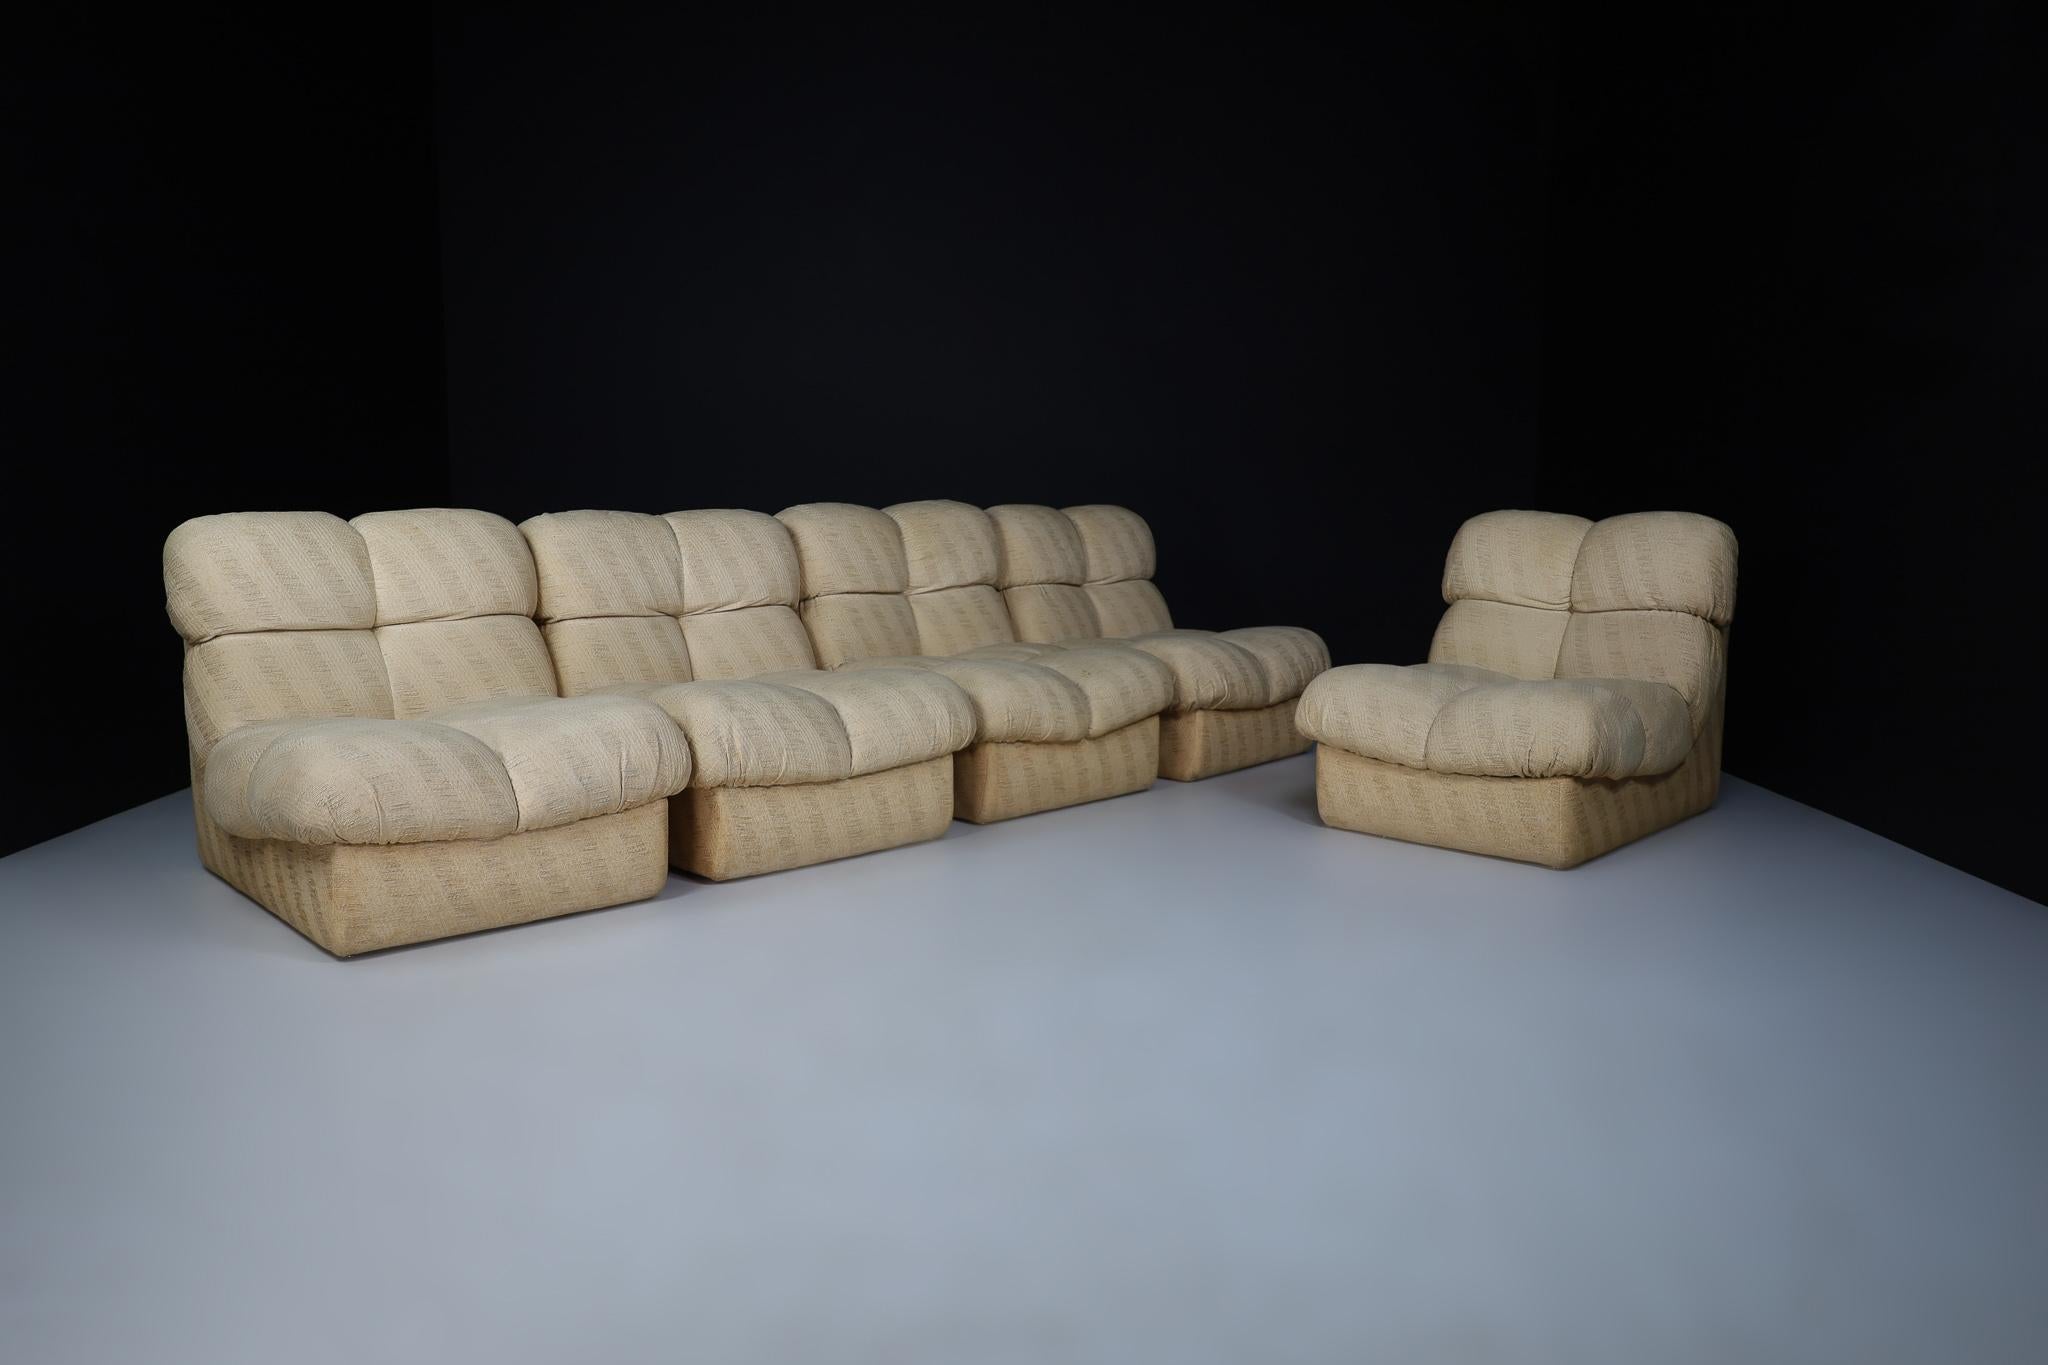 Set of Five Beige Fabric Mid century lounge chairs/sofa, Italy 1970

This design is characterized by an L-shaped form based on two connected tufted cushions. That gives the chair a voluminous and playful appearance. We currently have five items in